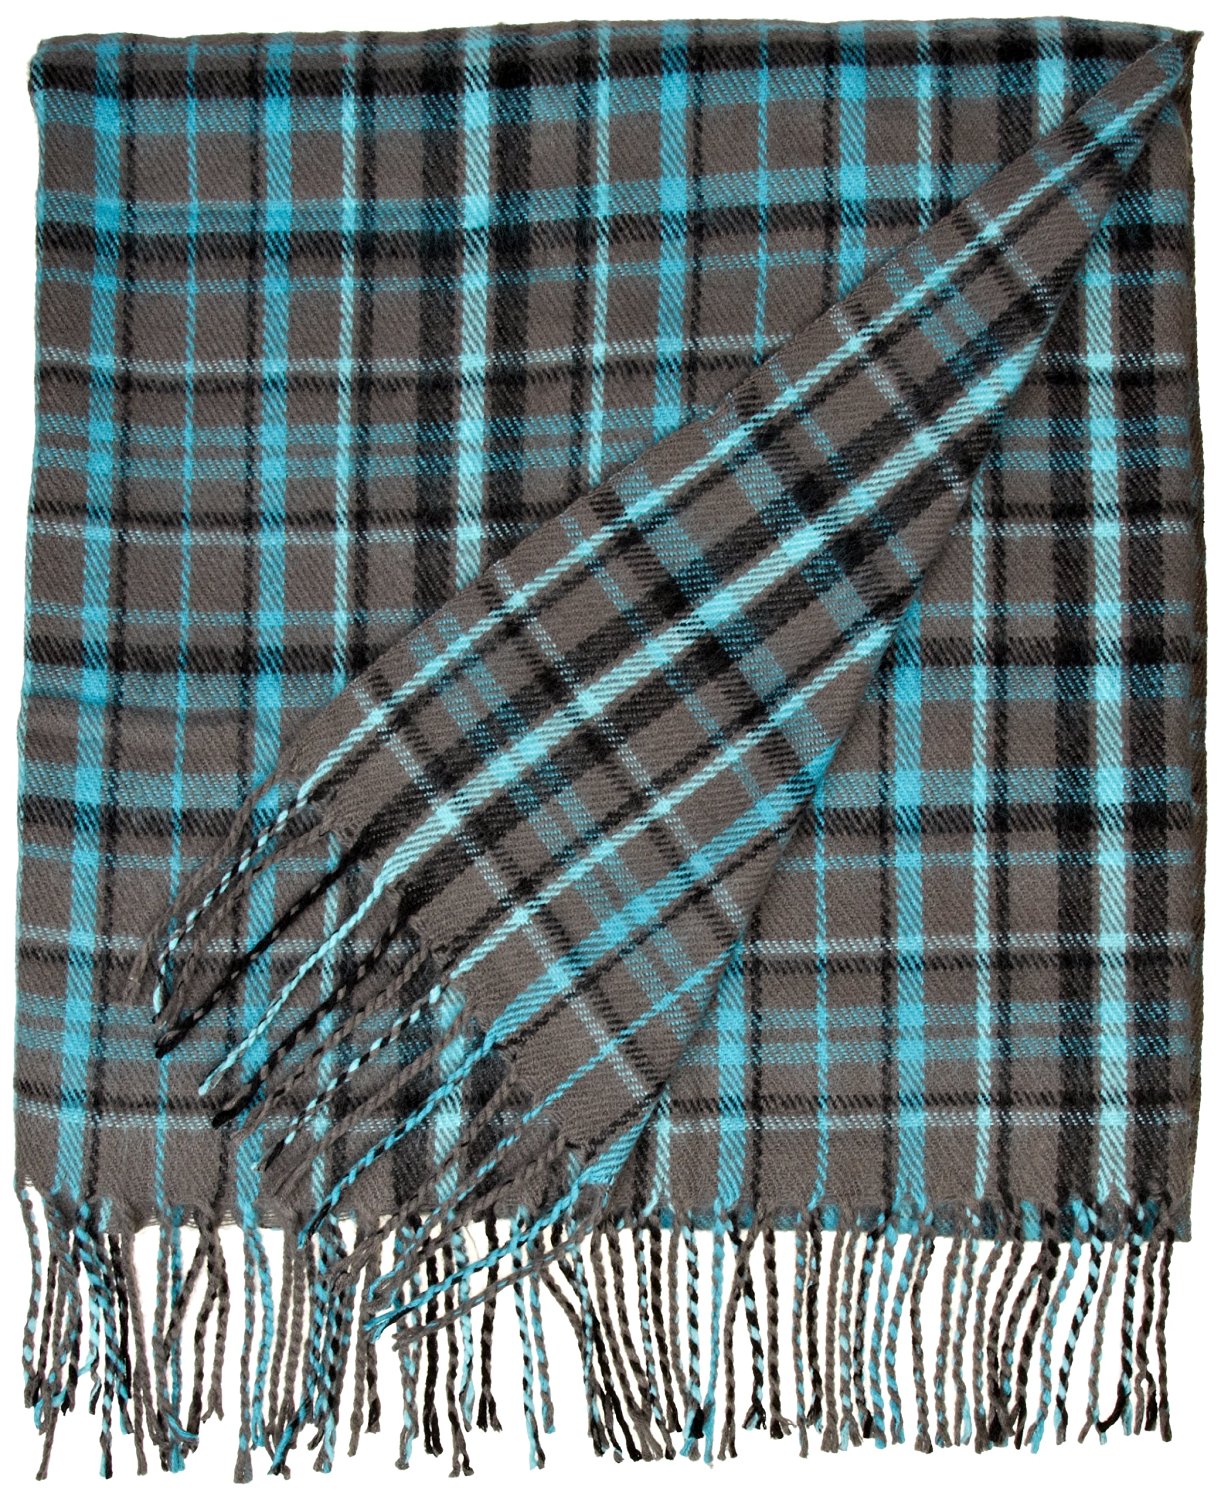 You'll love this stunning plaid throw from Amazon it's the perfect way to add some warmth to your decor this fall and winter affiliate link